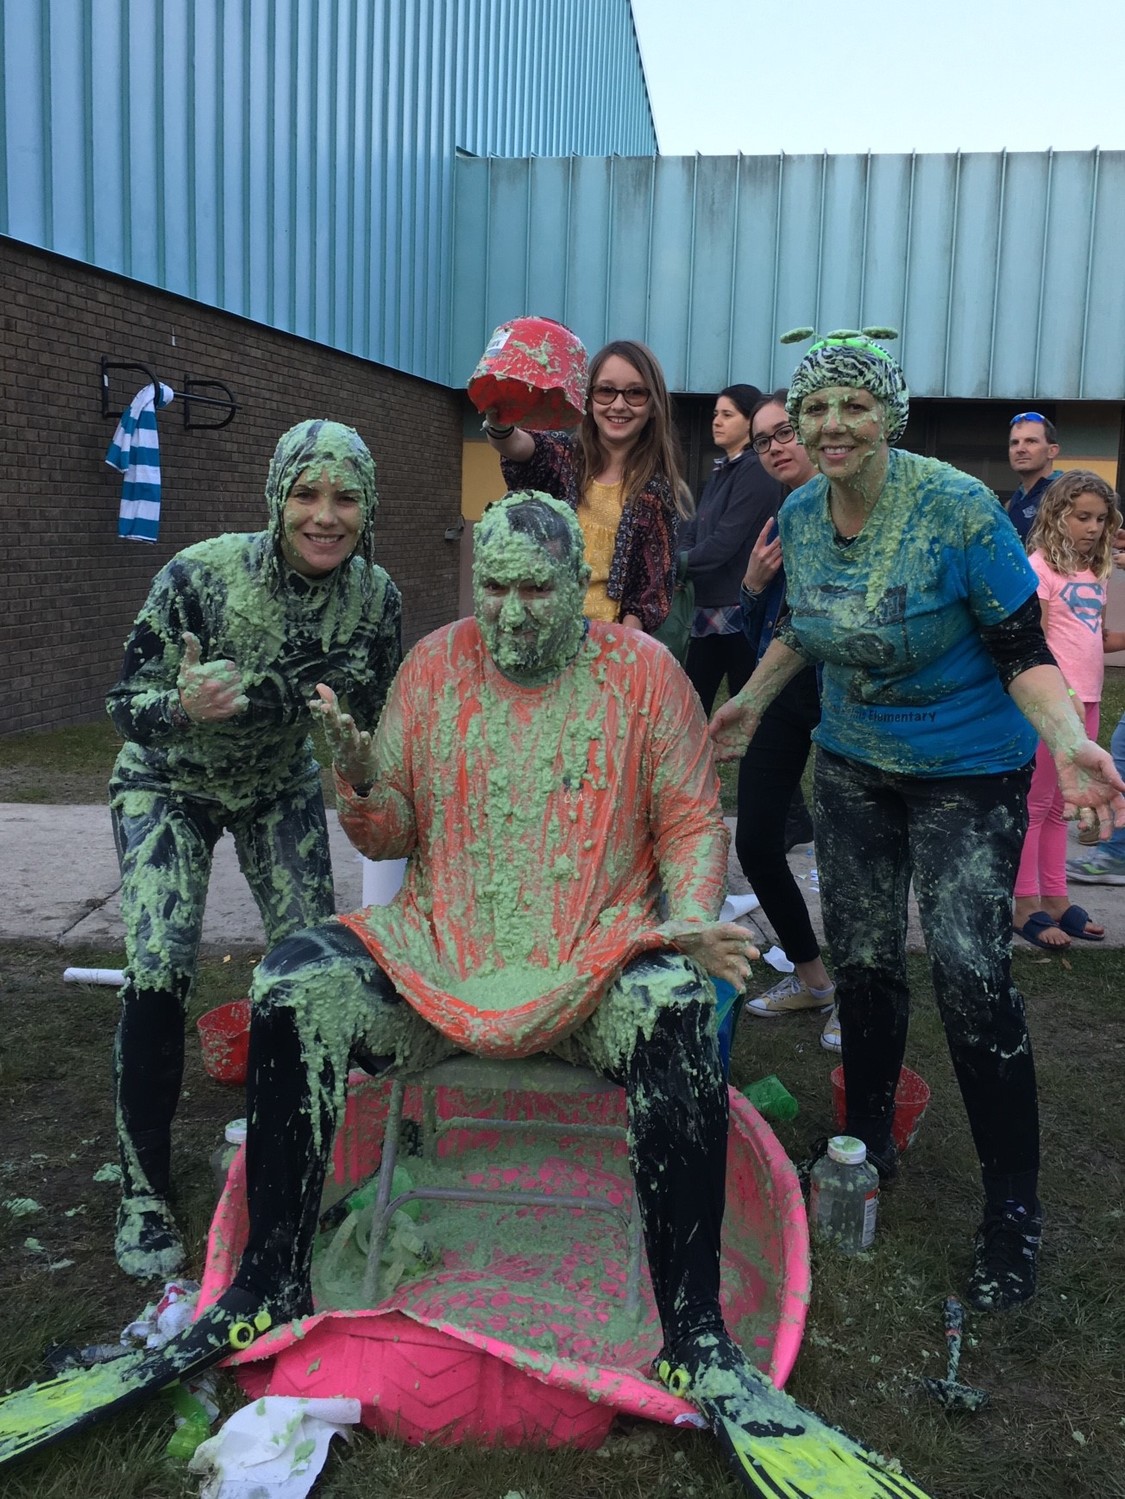 Slimeapalooza was a success at Ocean Palms Elementary Spring Family Fun Night, raising almost $700 to benefit The Giving Orchard at OPE. Students had the opportunity to purchase “slime” to pour on the school principal, Tiffany Cantwell, the assistant principal, Zach Strom, and the school secretary, Kerry Fodor. The fifth-grade Ambassadors were trying to raise money to purchase two orange trees for The Giving Orchard, exceeding their goal of $225 by almost $500.  The oranges from the Giving Orchard trees will be donated to the hungry in the community, and the remaining money will be donated to another cause voted on by the Ambassadors.